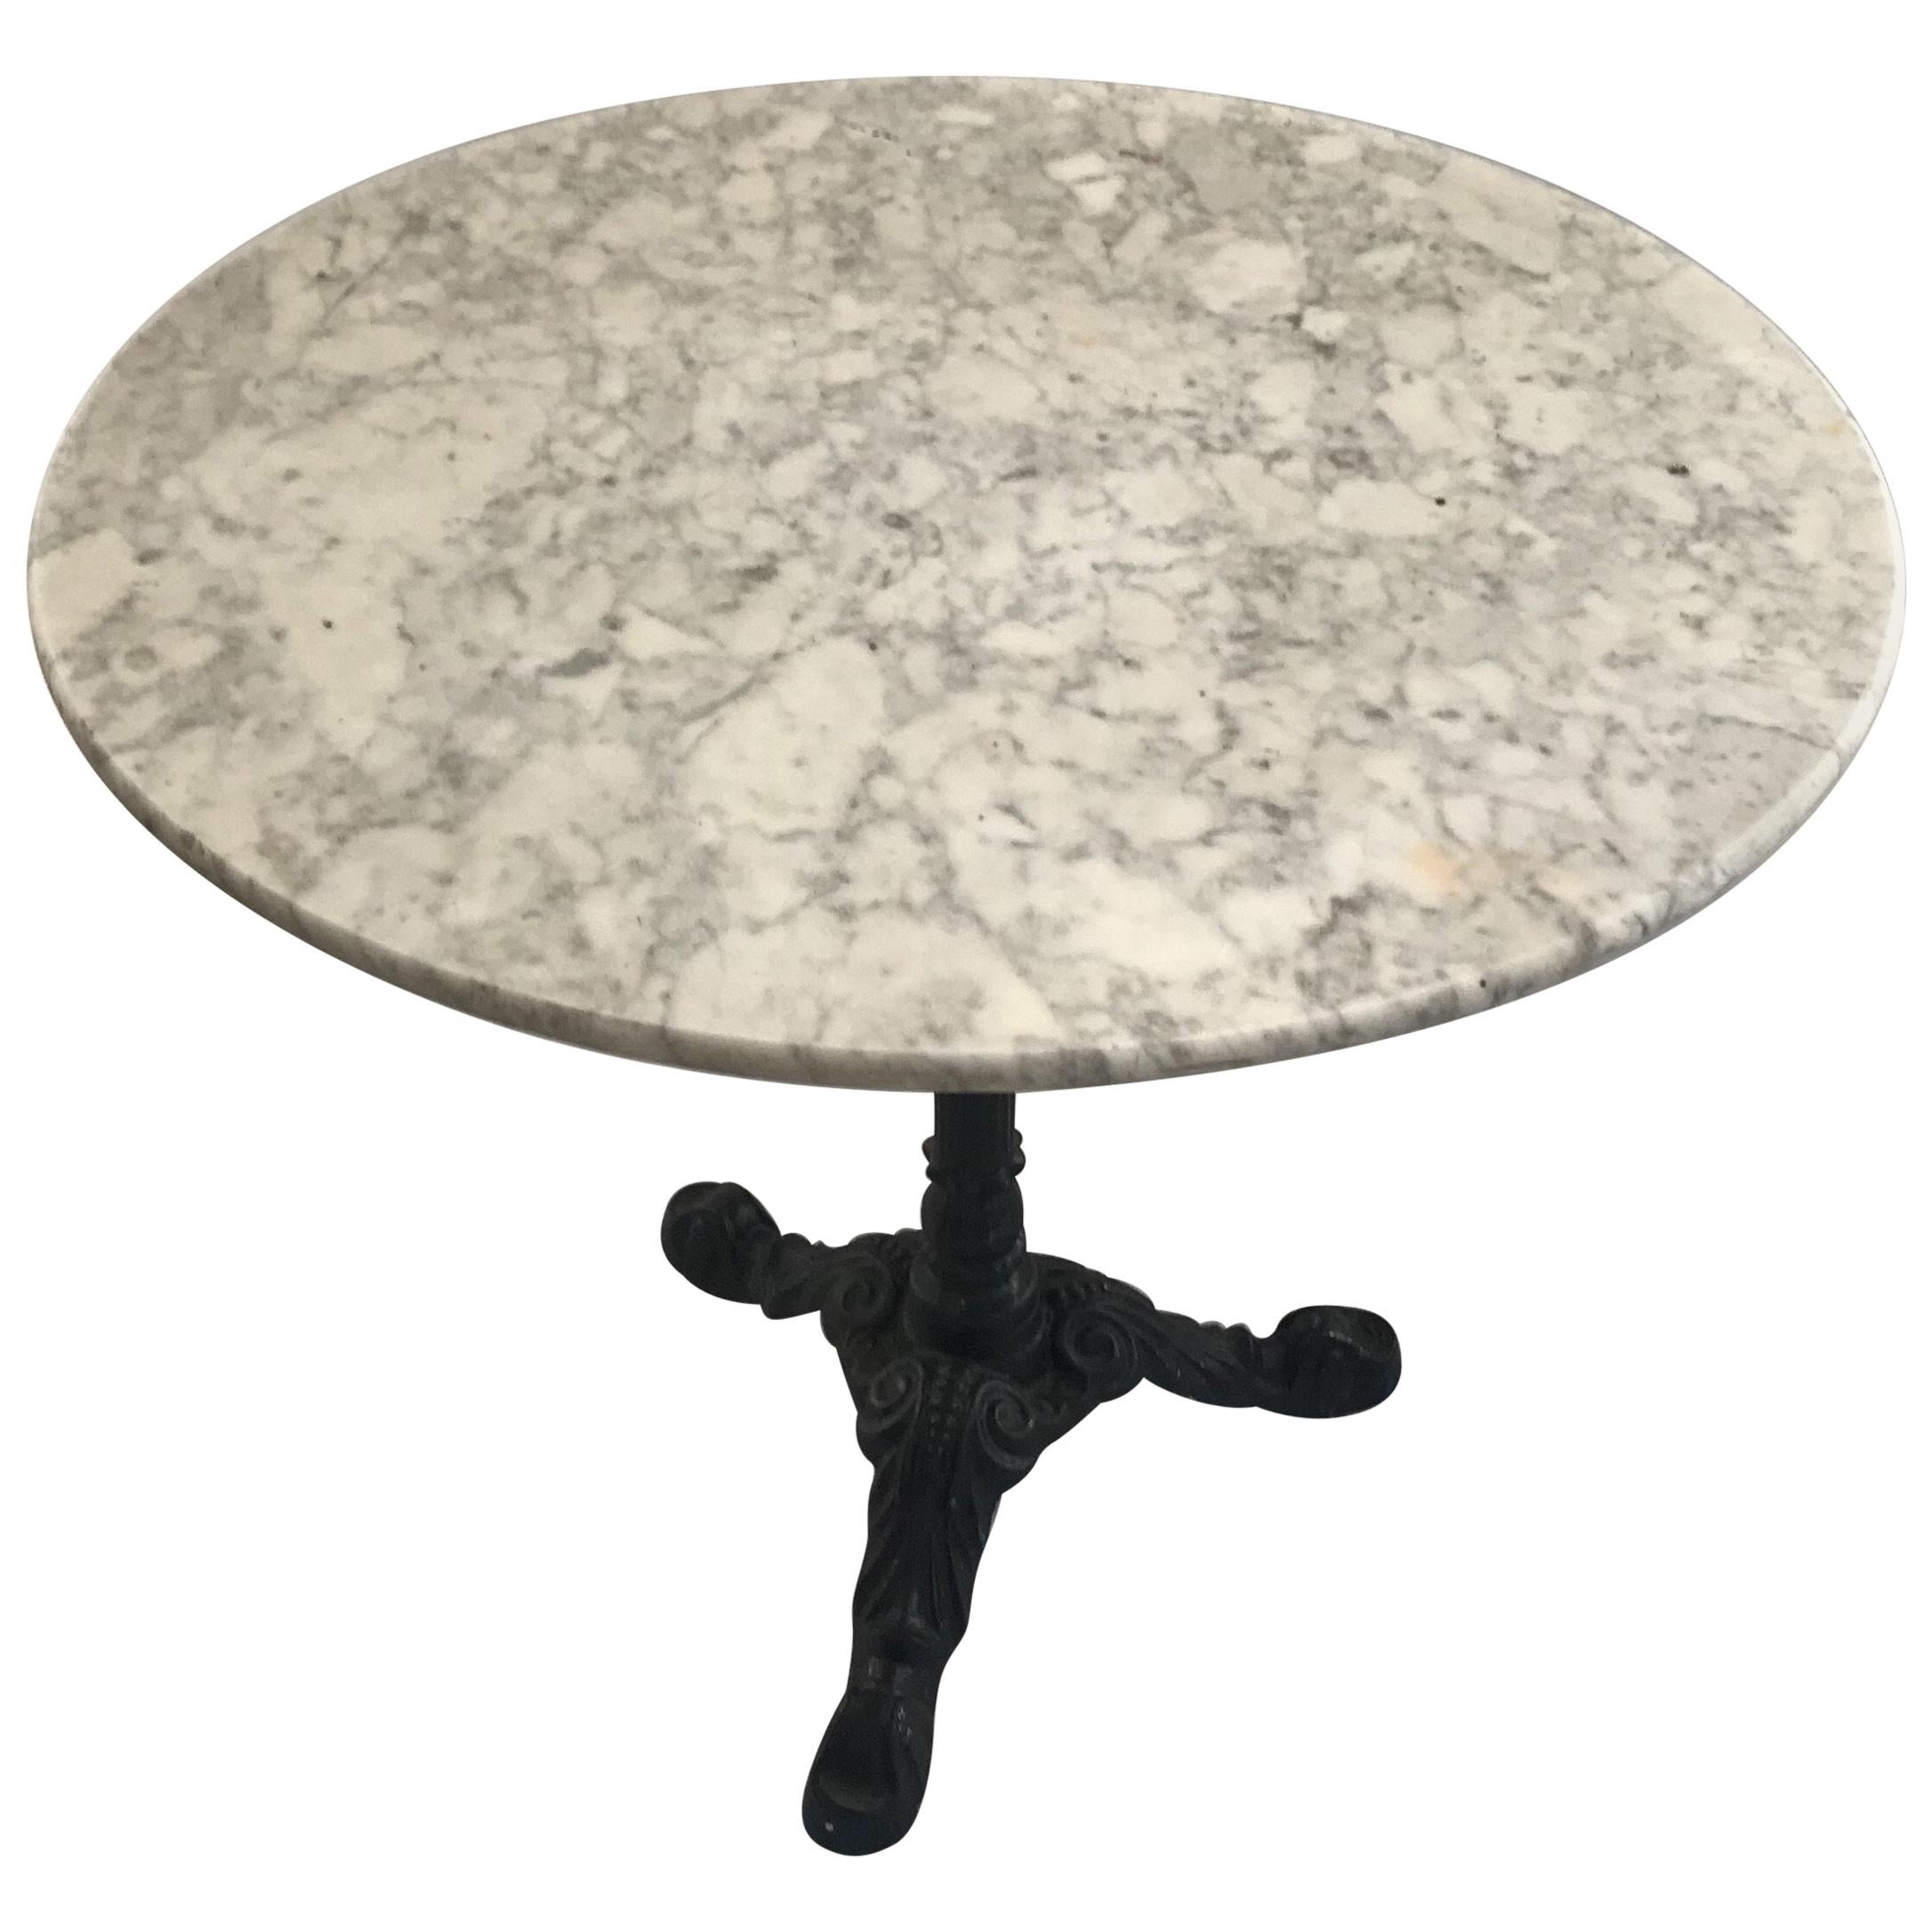 Classic Antique French Marble Round Cafe or Bistro Table